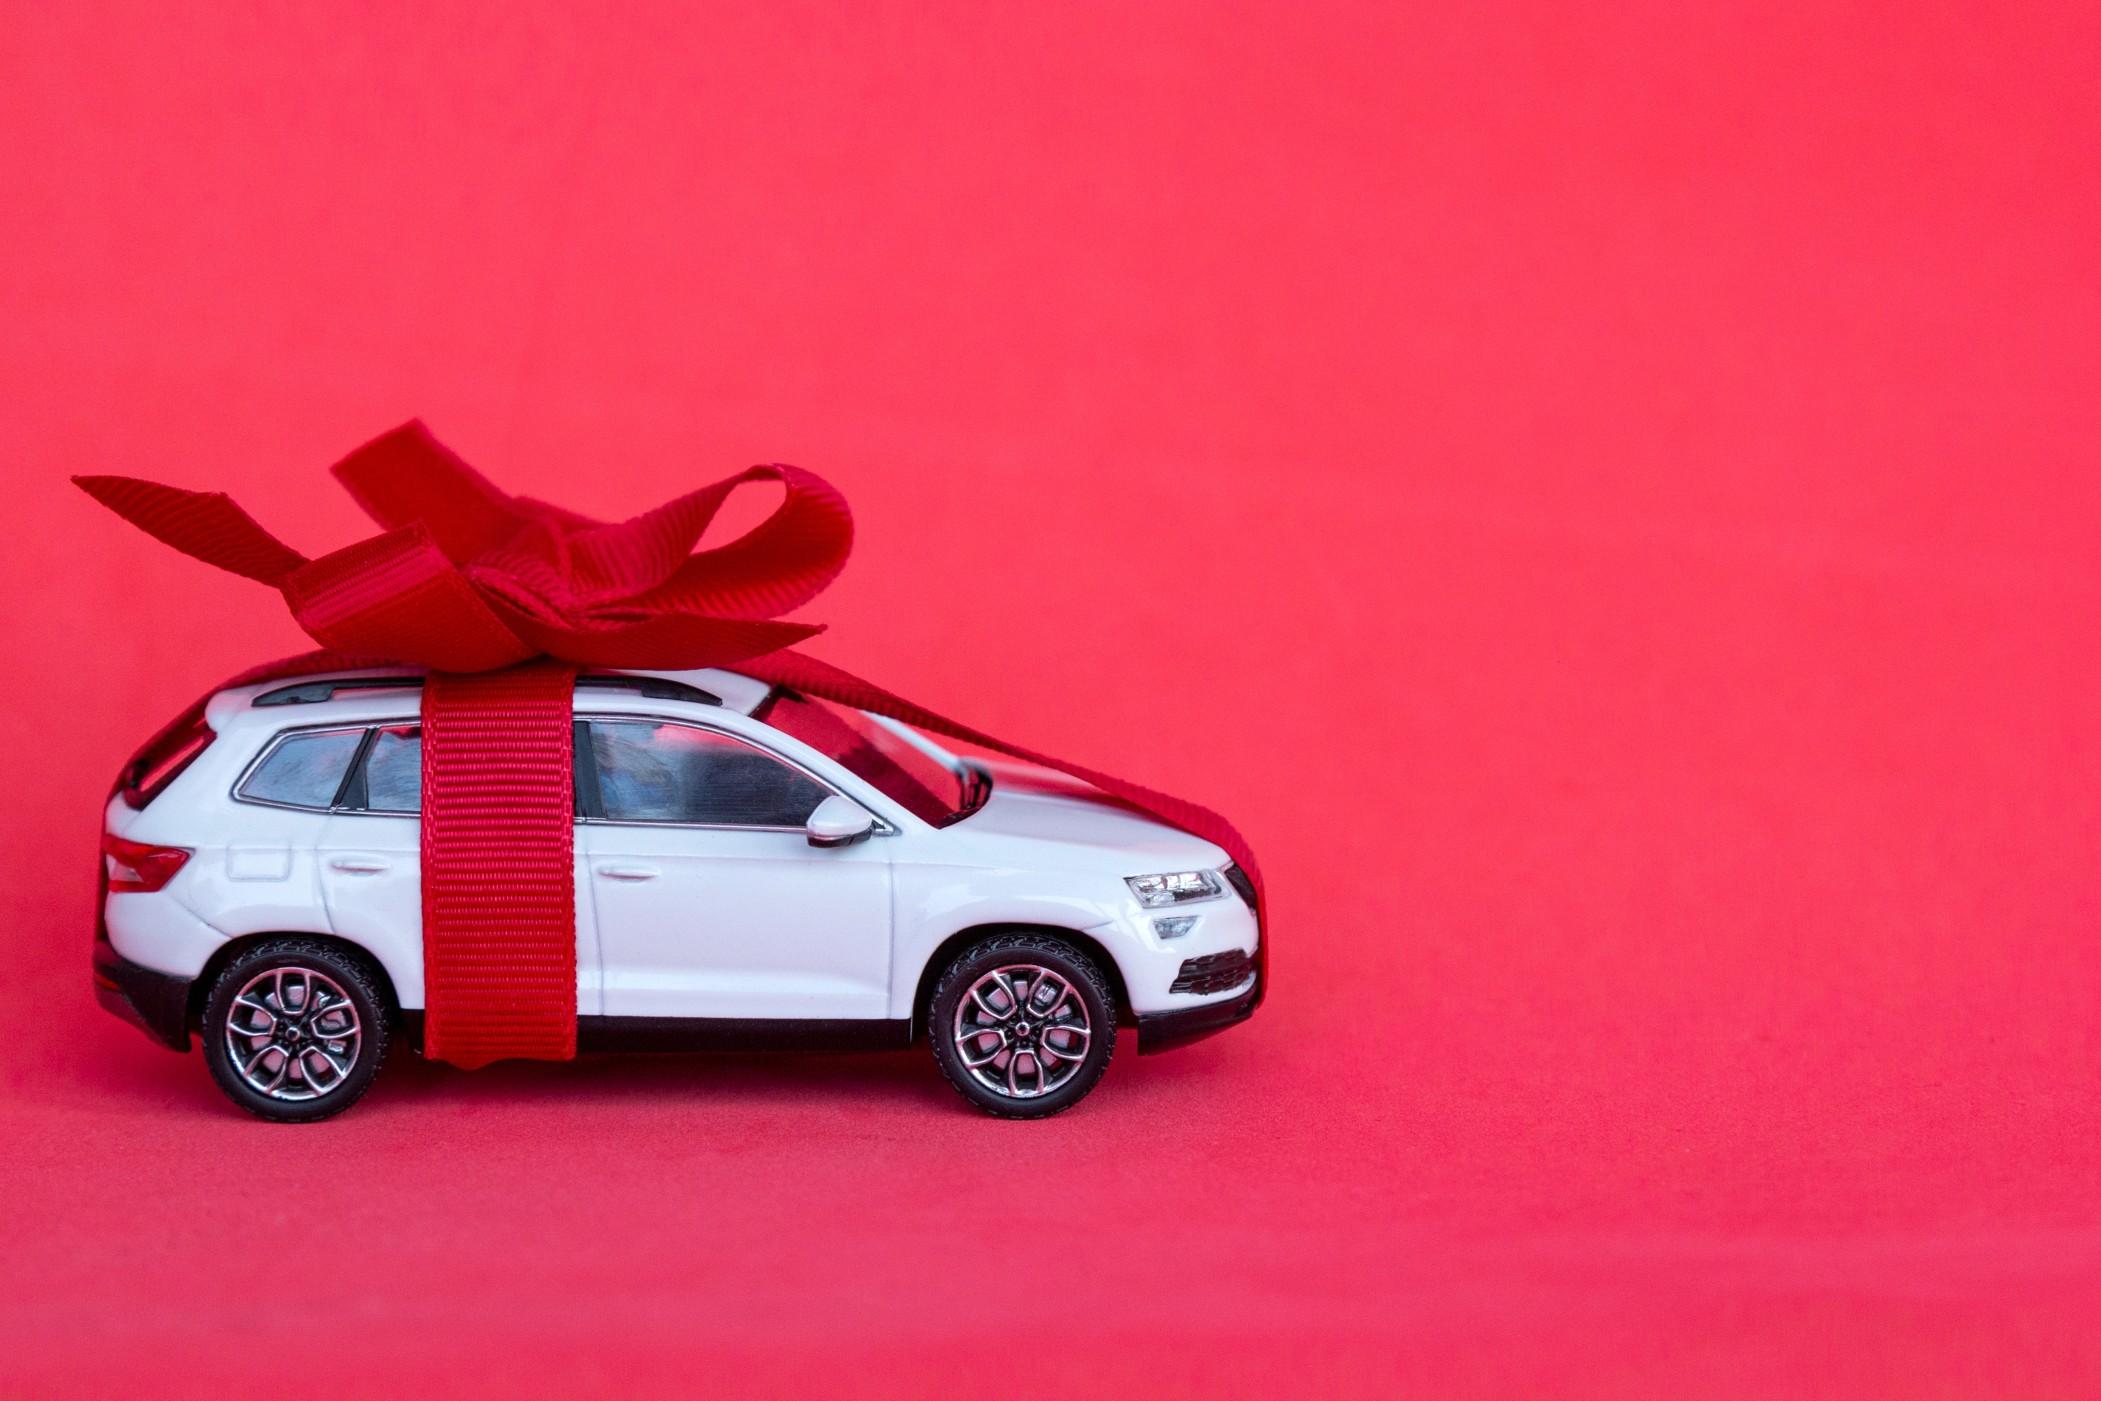 Do people really buy cars as Christmas gifts? Here are a few tips for how to buy your loved one a car this holiday season. 